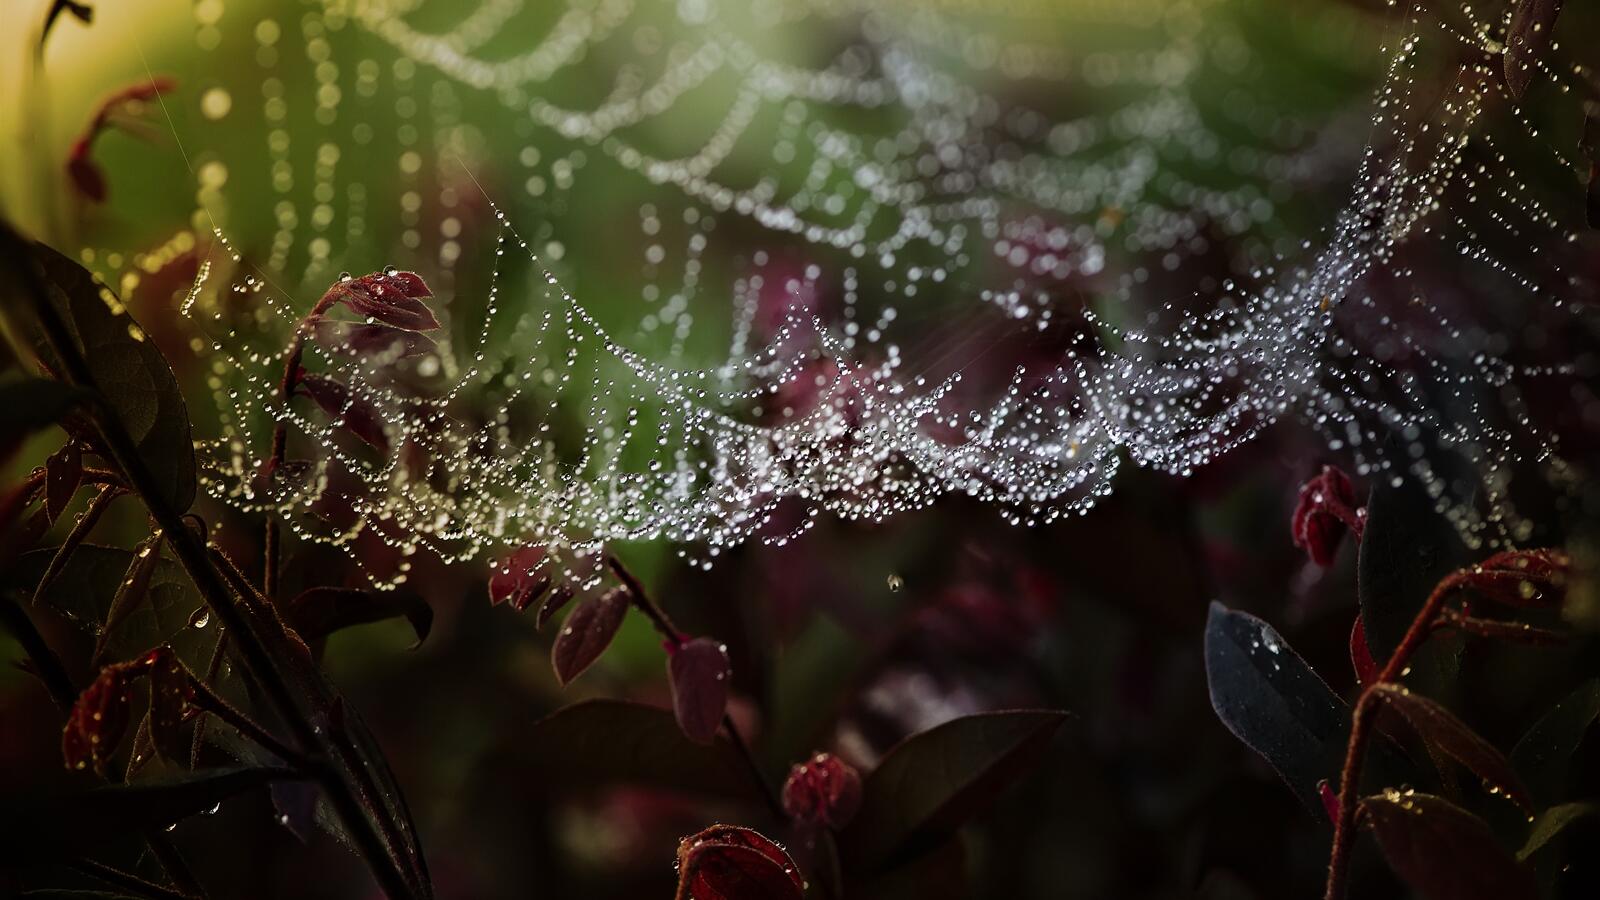 Wallpapers cobwebs insect drop on the desktop